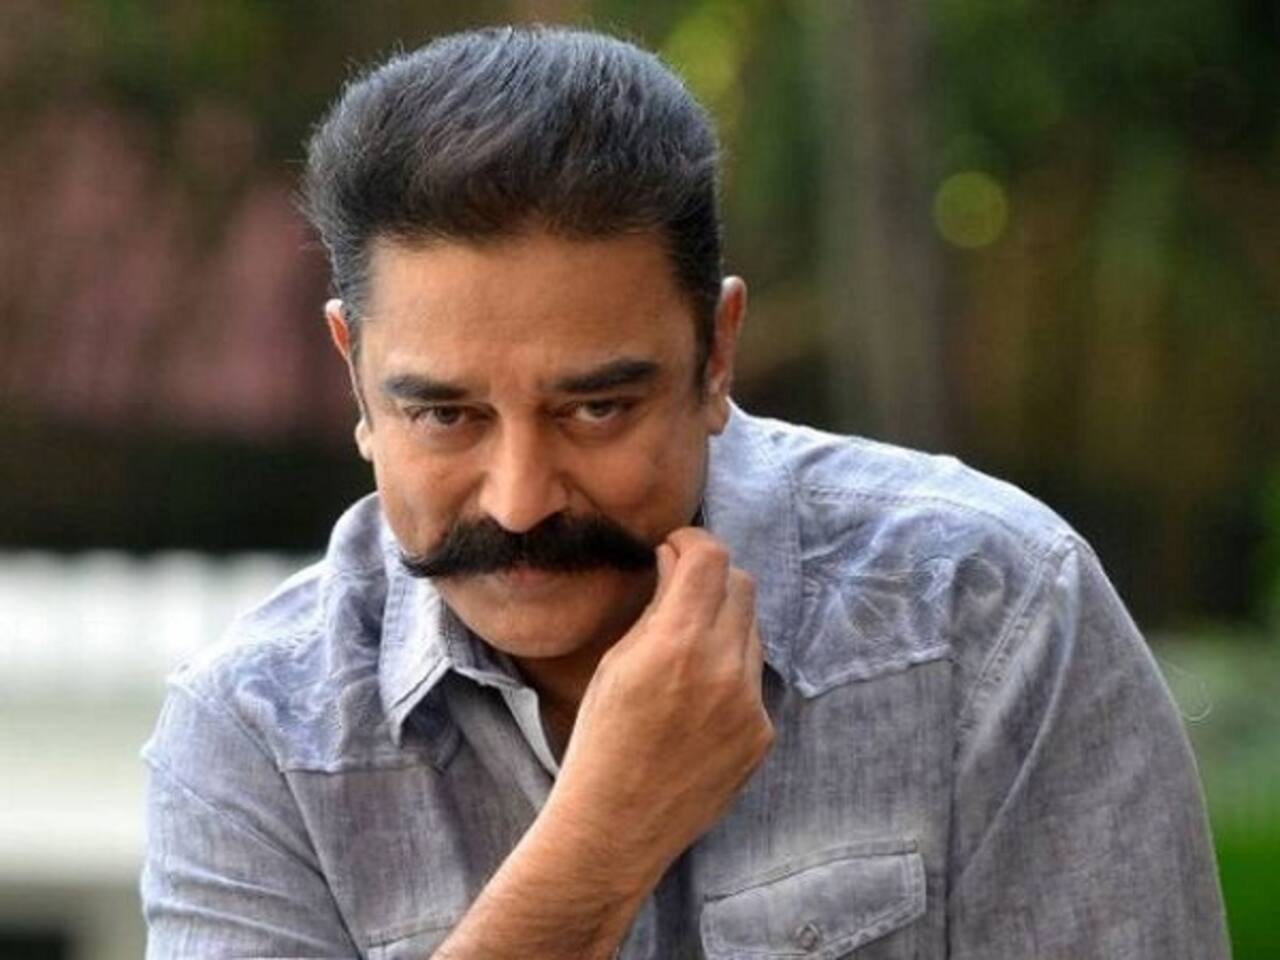 Bigg Boss 2 Tamil: Complaint against Kamal Haasan for allegedly portraying Jayalalithaa as 'dictator' in the show